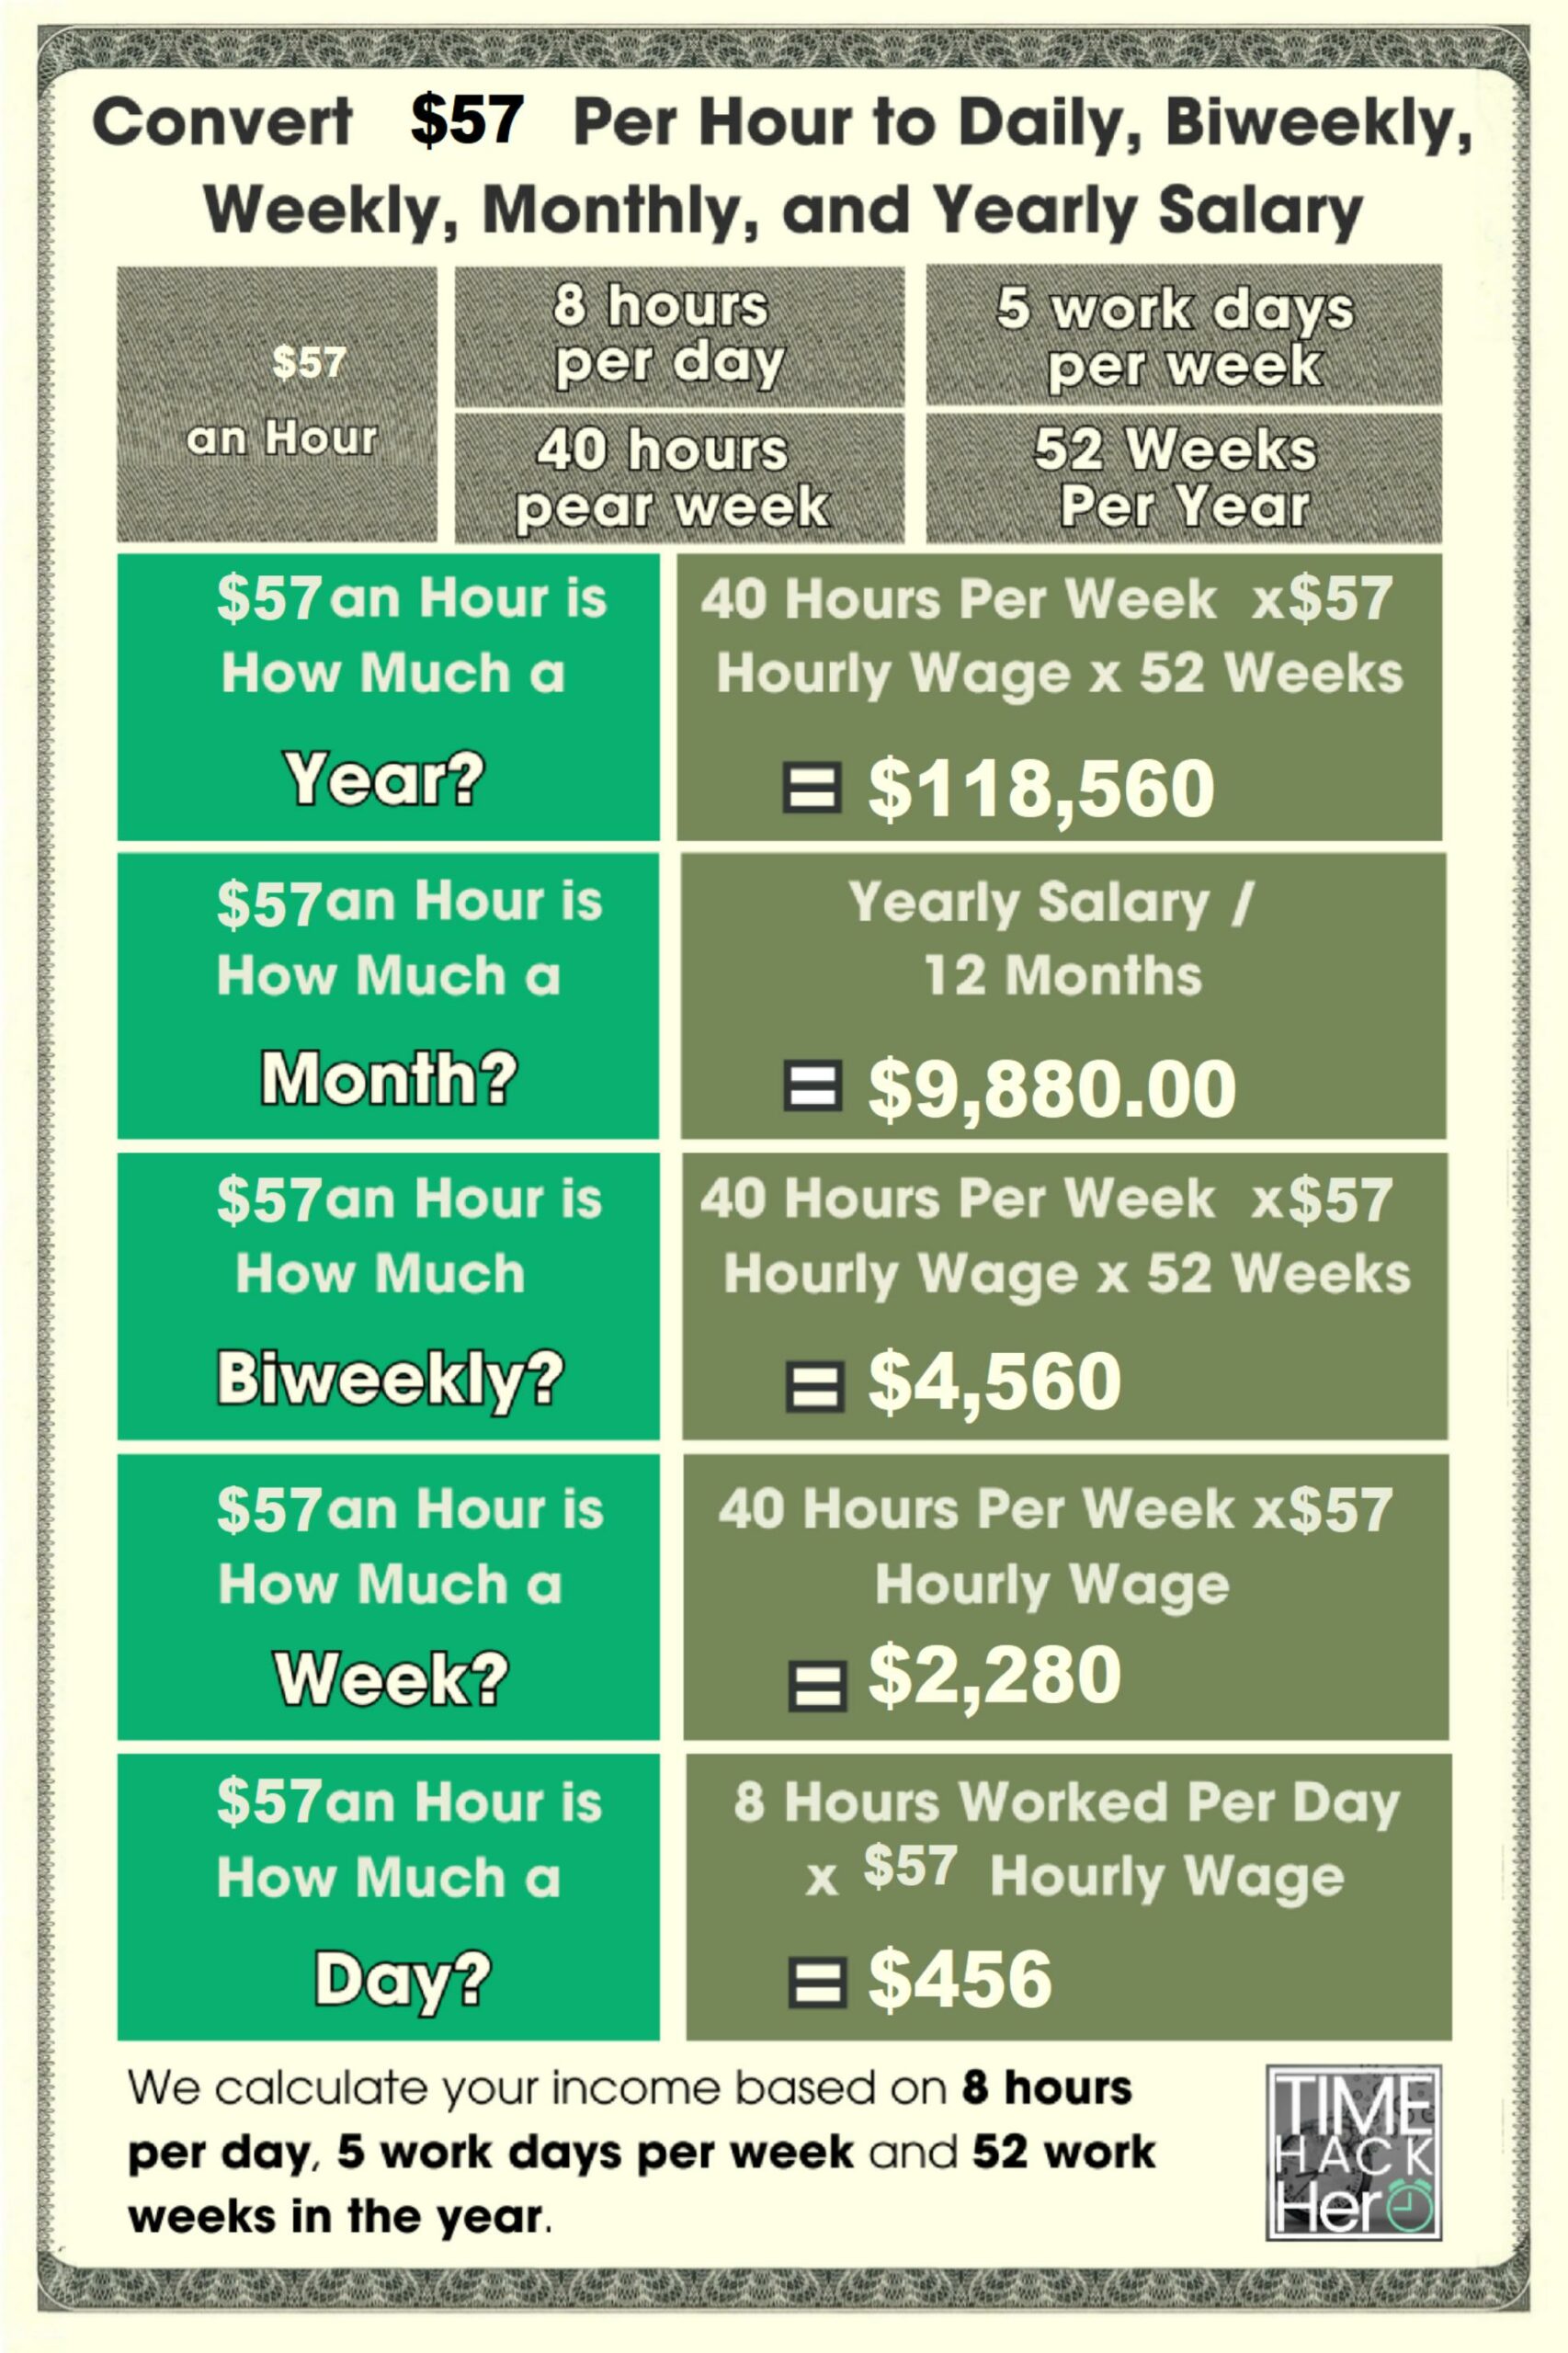 Convert $57 Per Hour to Weekly, Monthly, and Yearly Salary